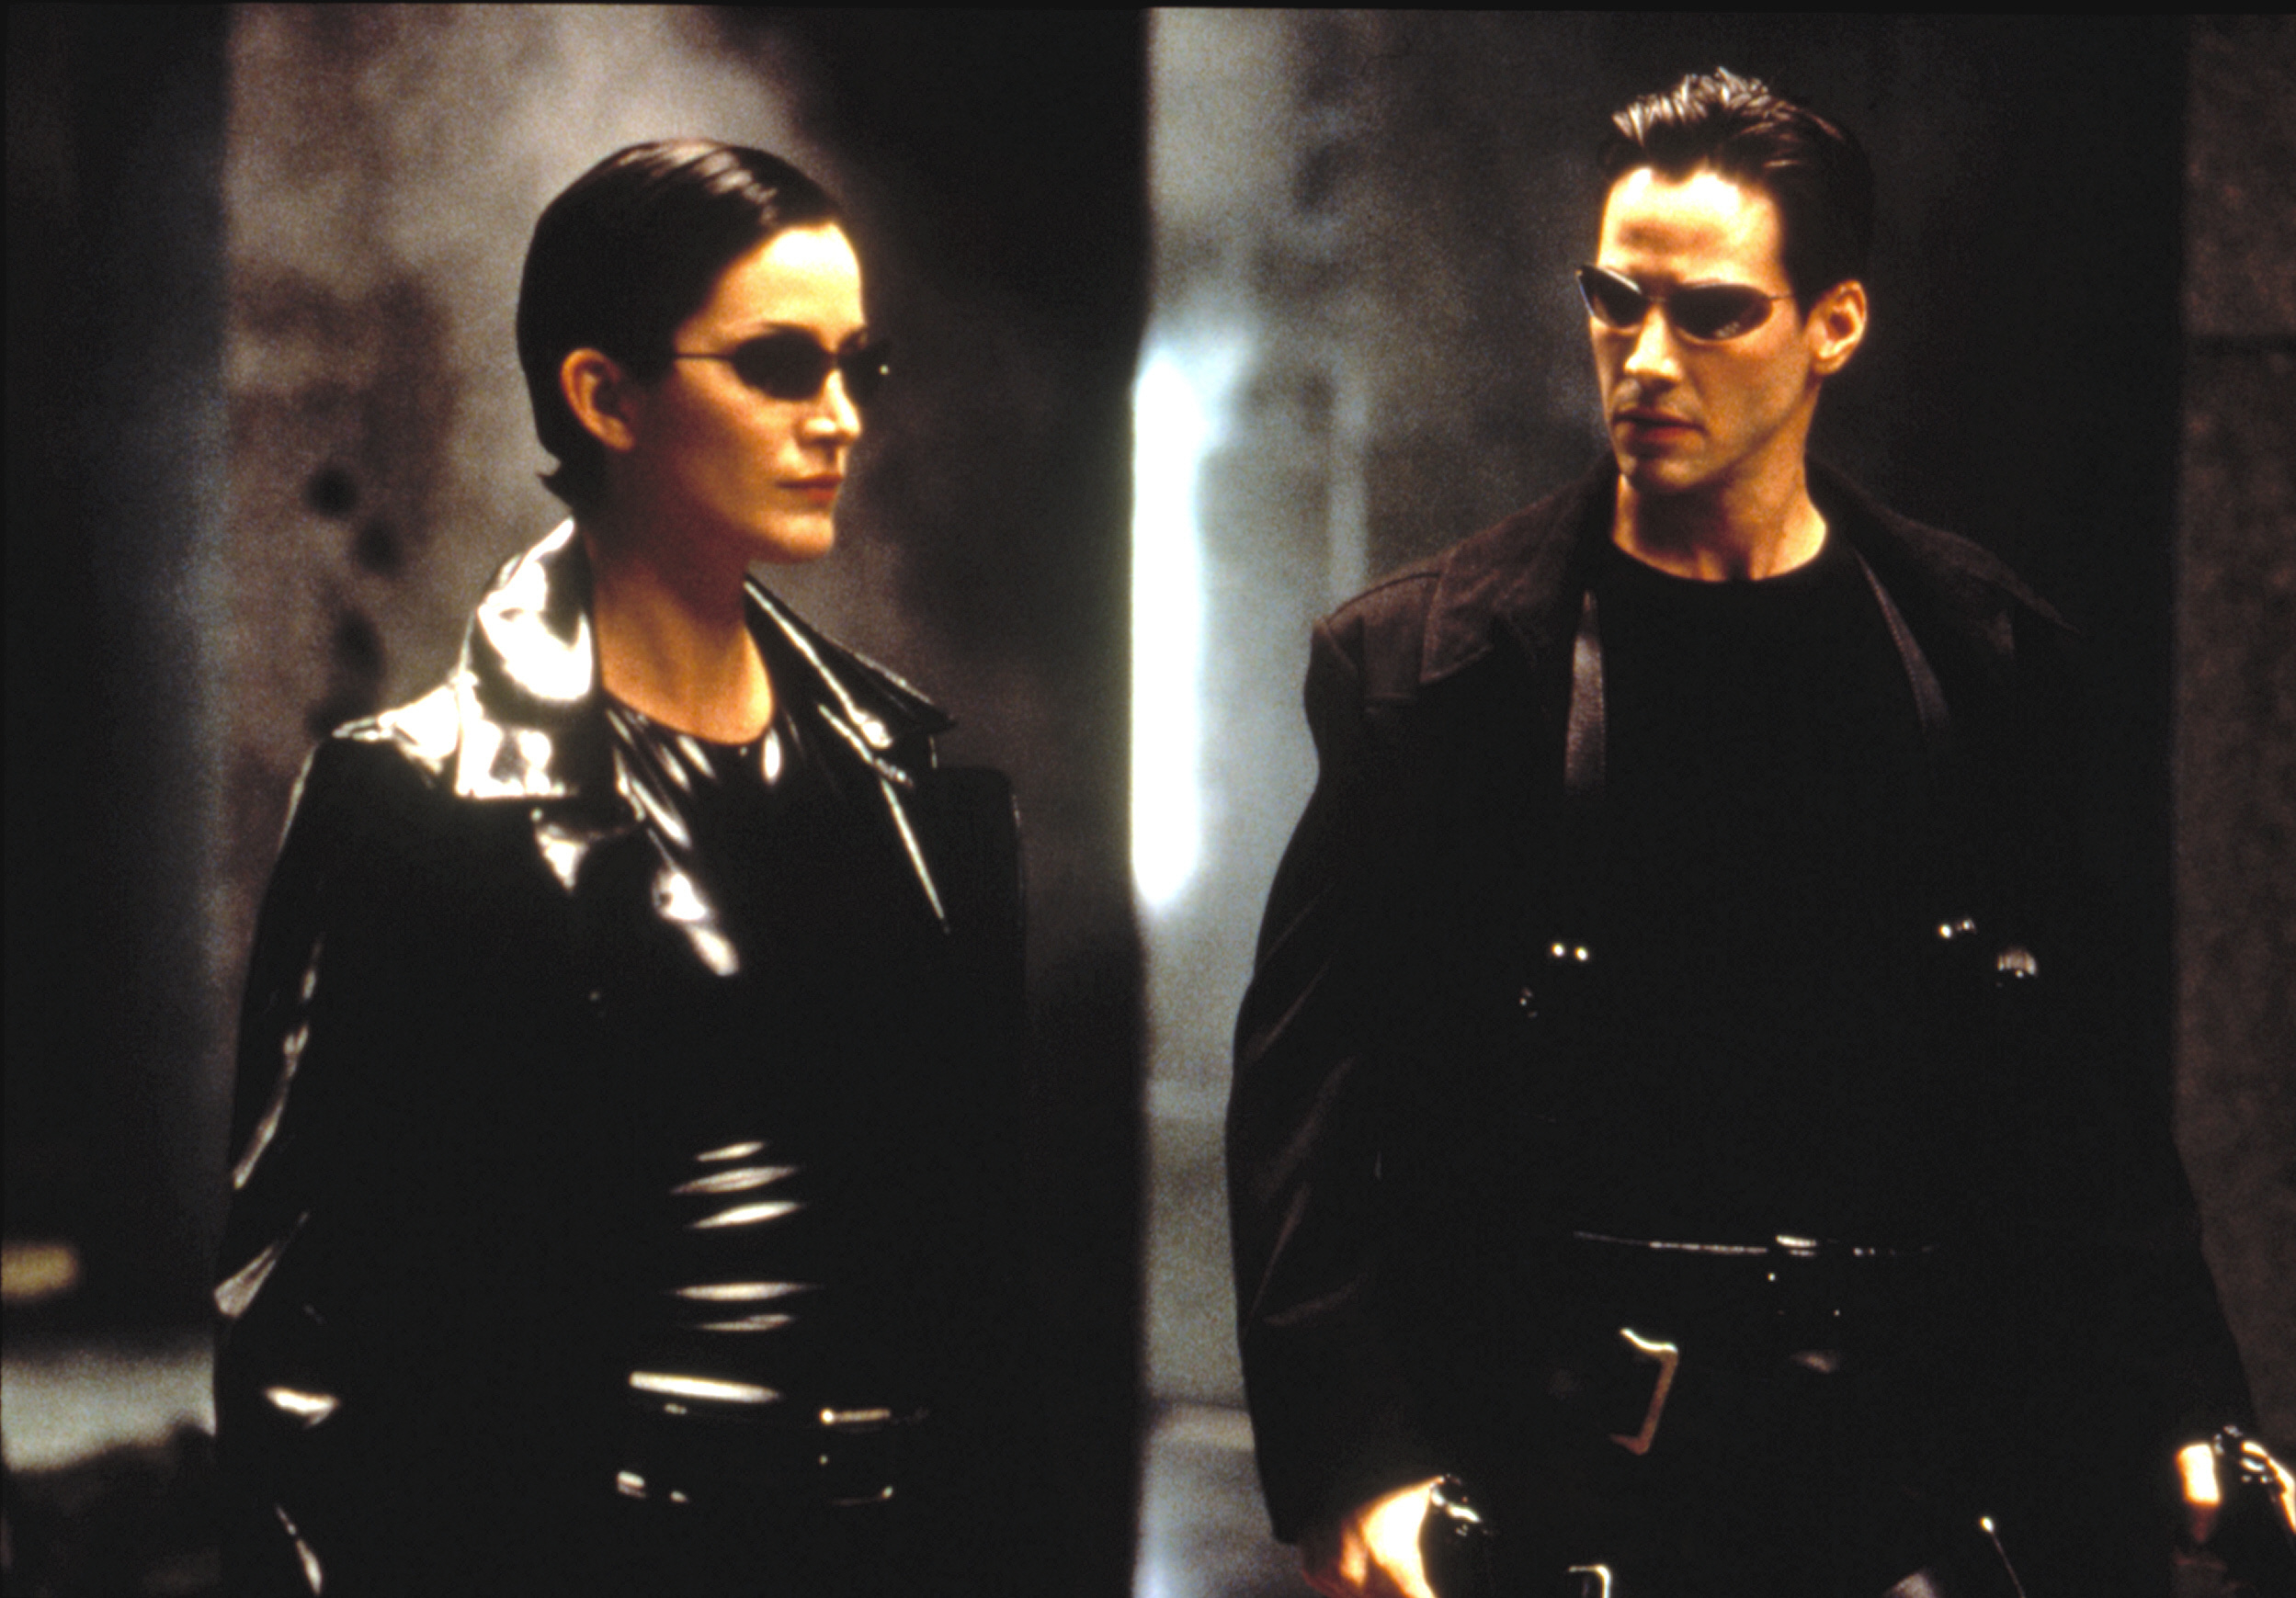 Two characters from The Matrix, Trinity and Neo, stand side by side in black, fitted clothing